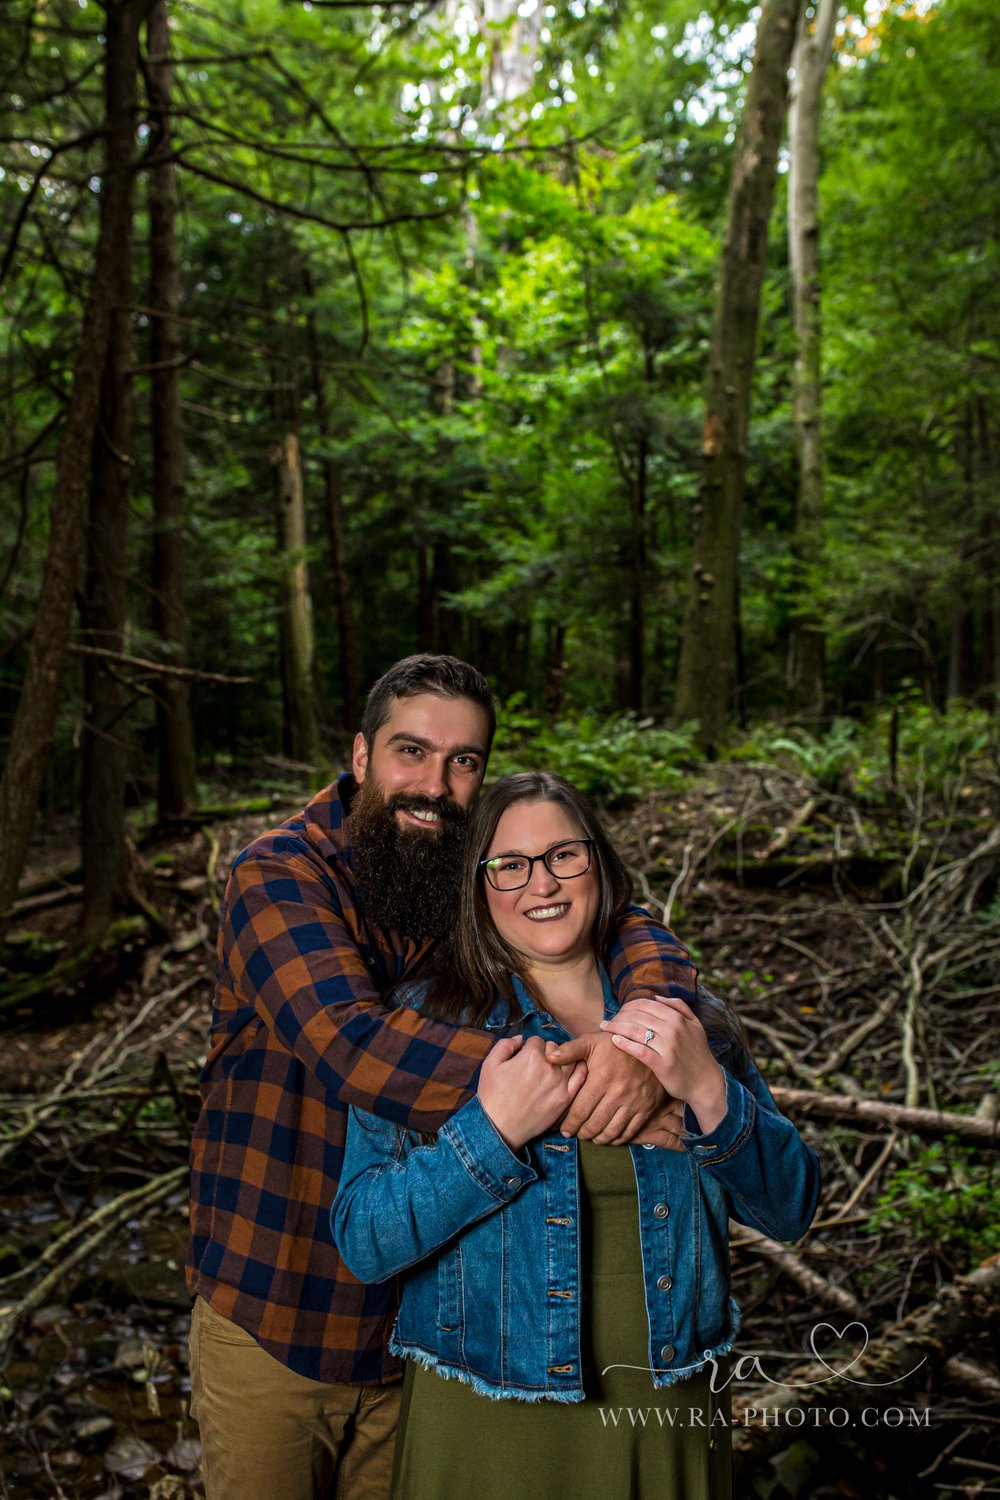 025-MGS-FALLS-CREEK-PA-ENGAGEMENT-PICTURES.jpg